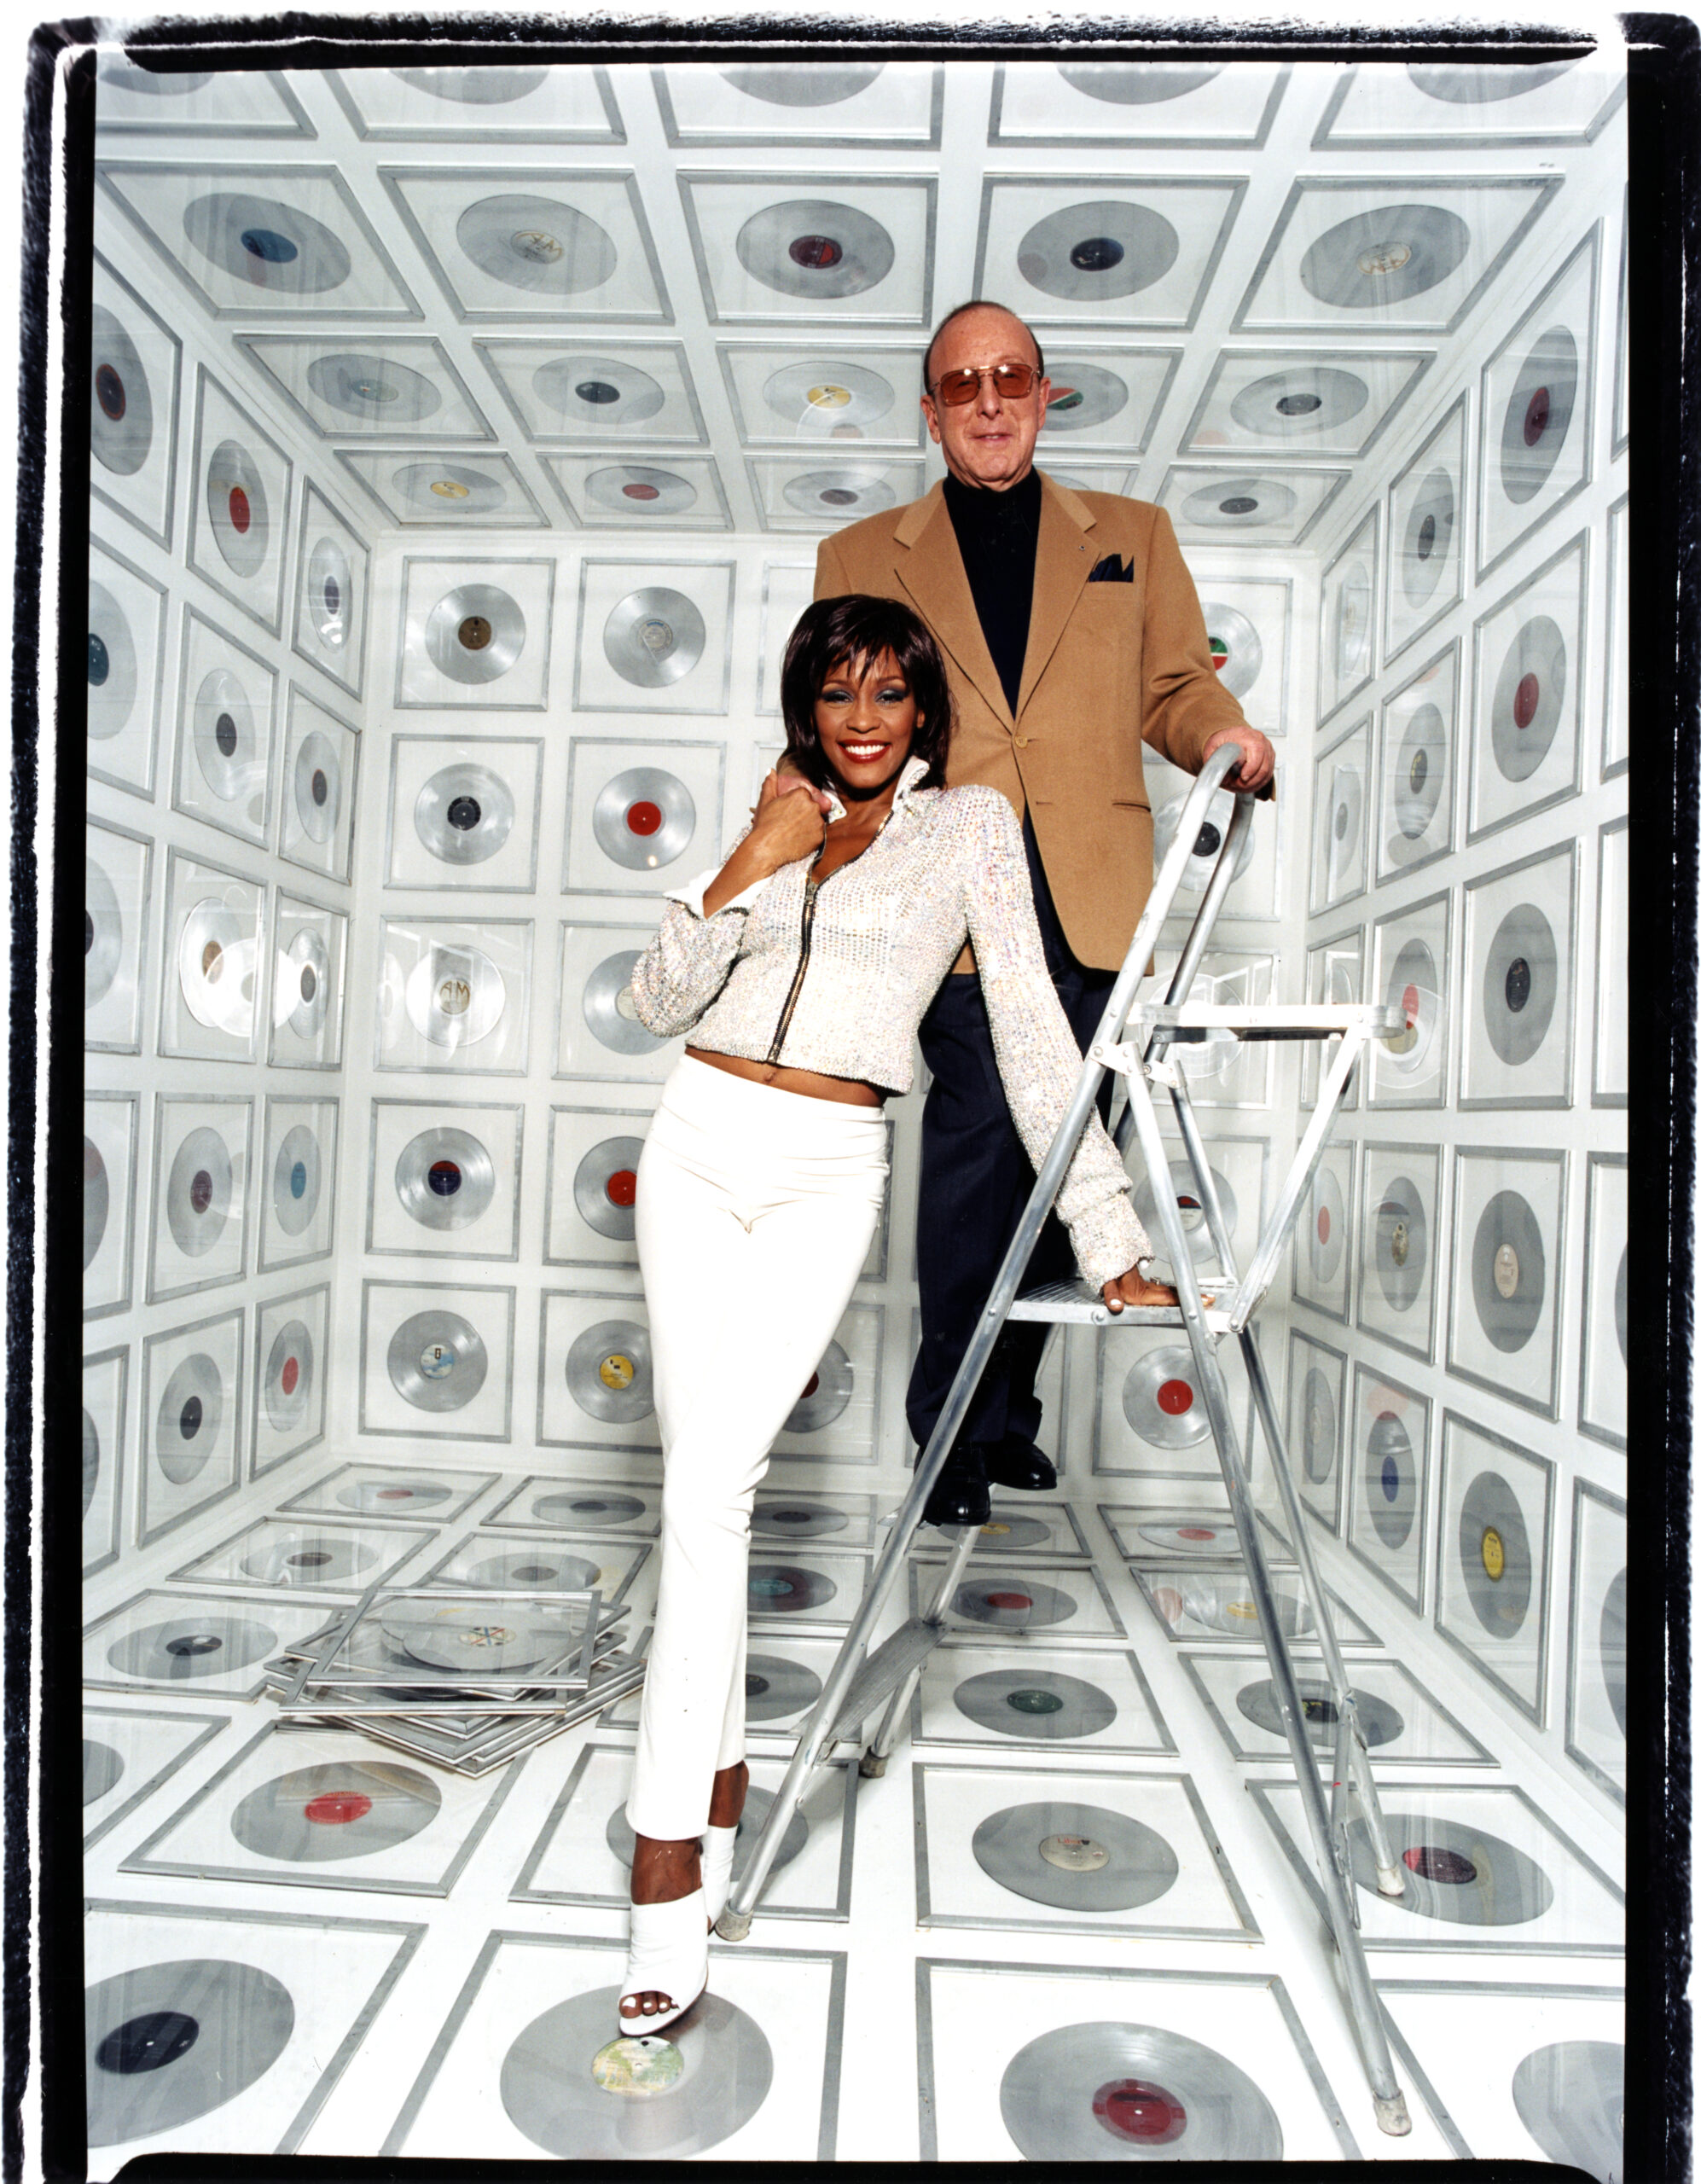 Whitney Houston with Clive Davis. Photo by: David LaChapelle 2000